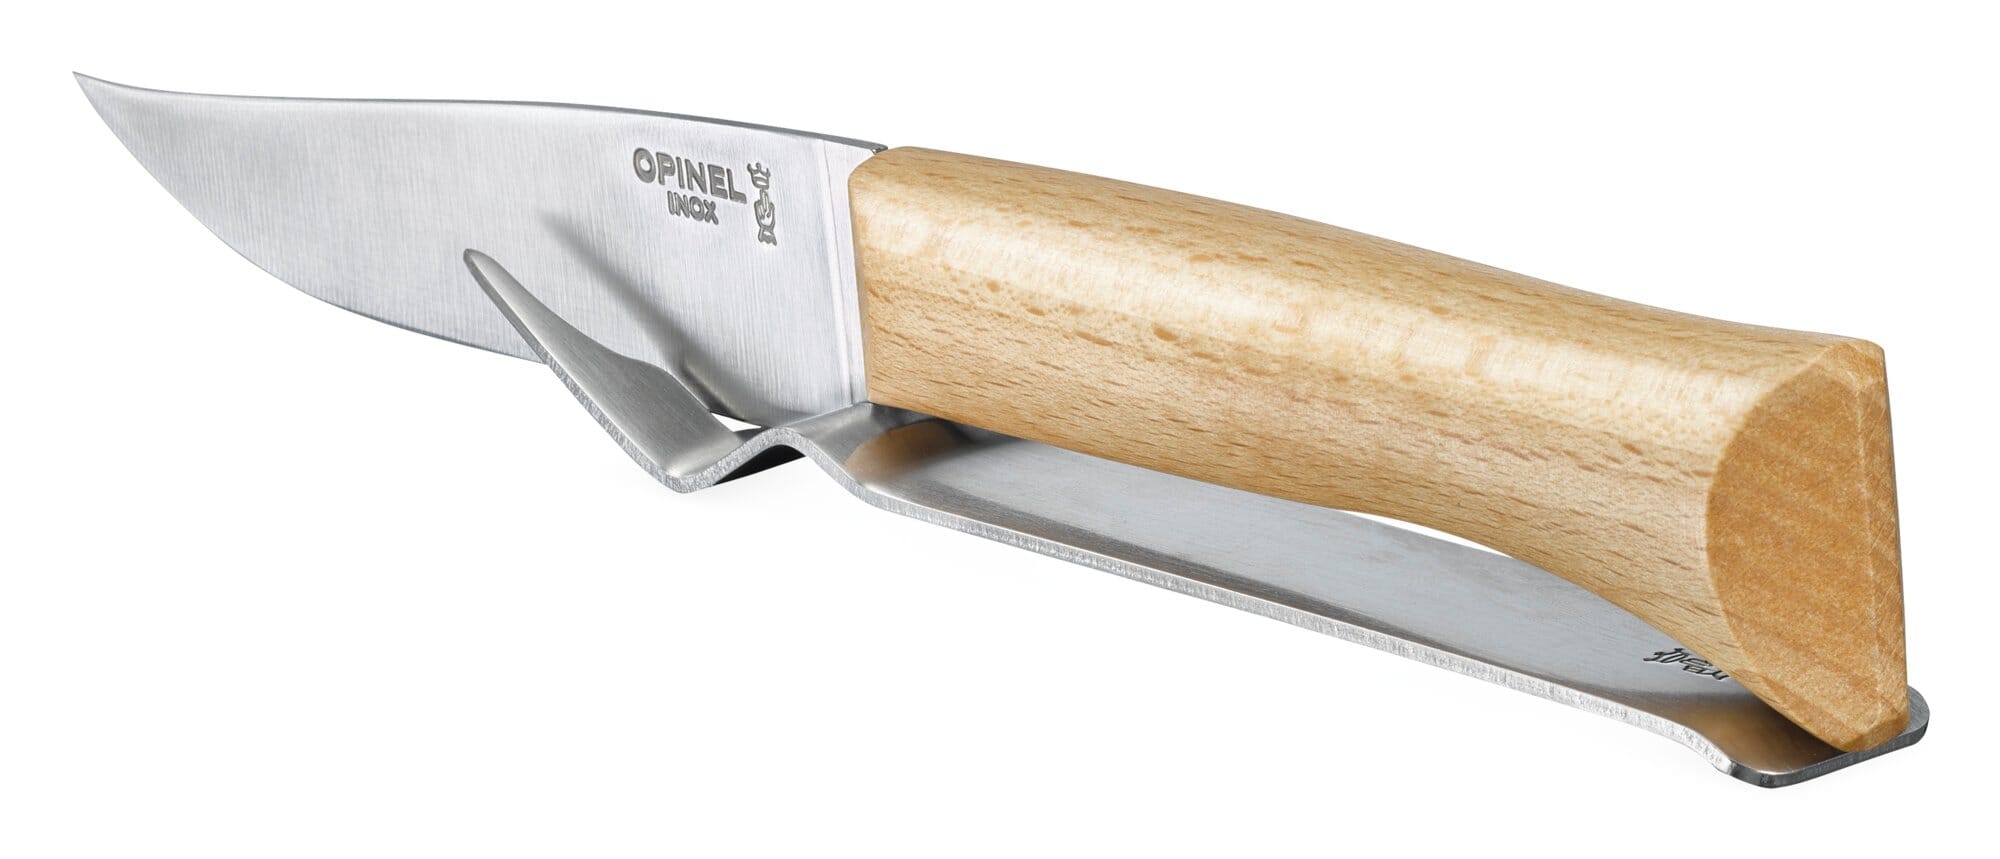 Cheese knife set Opinel